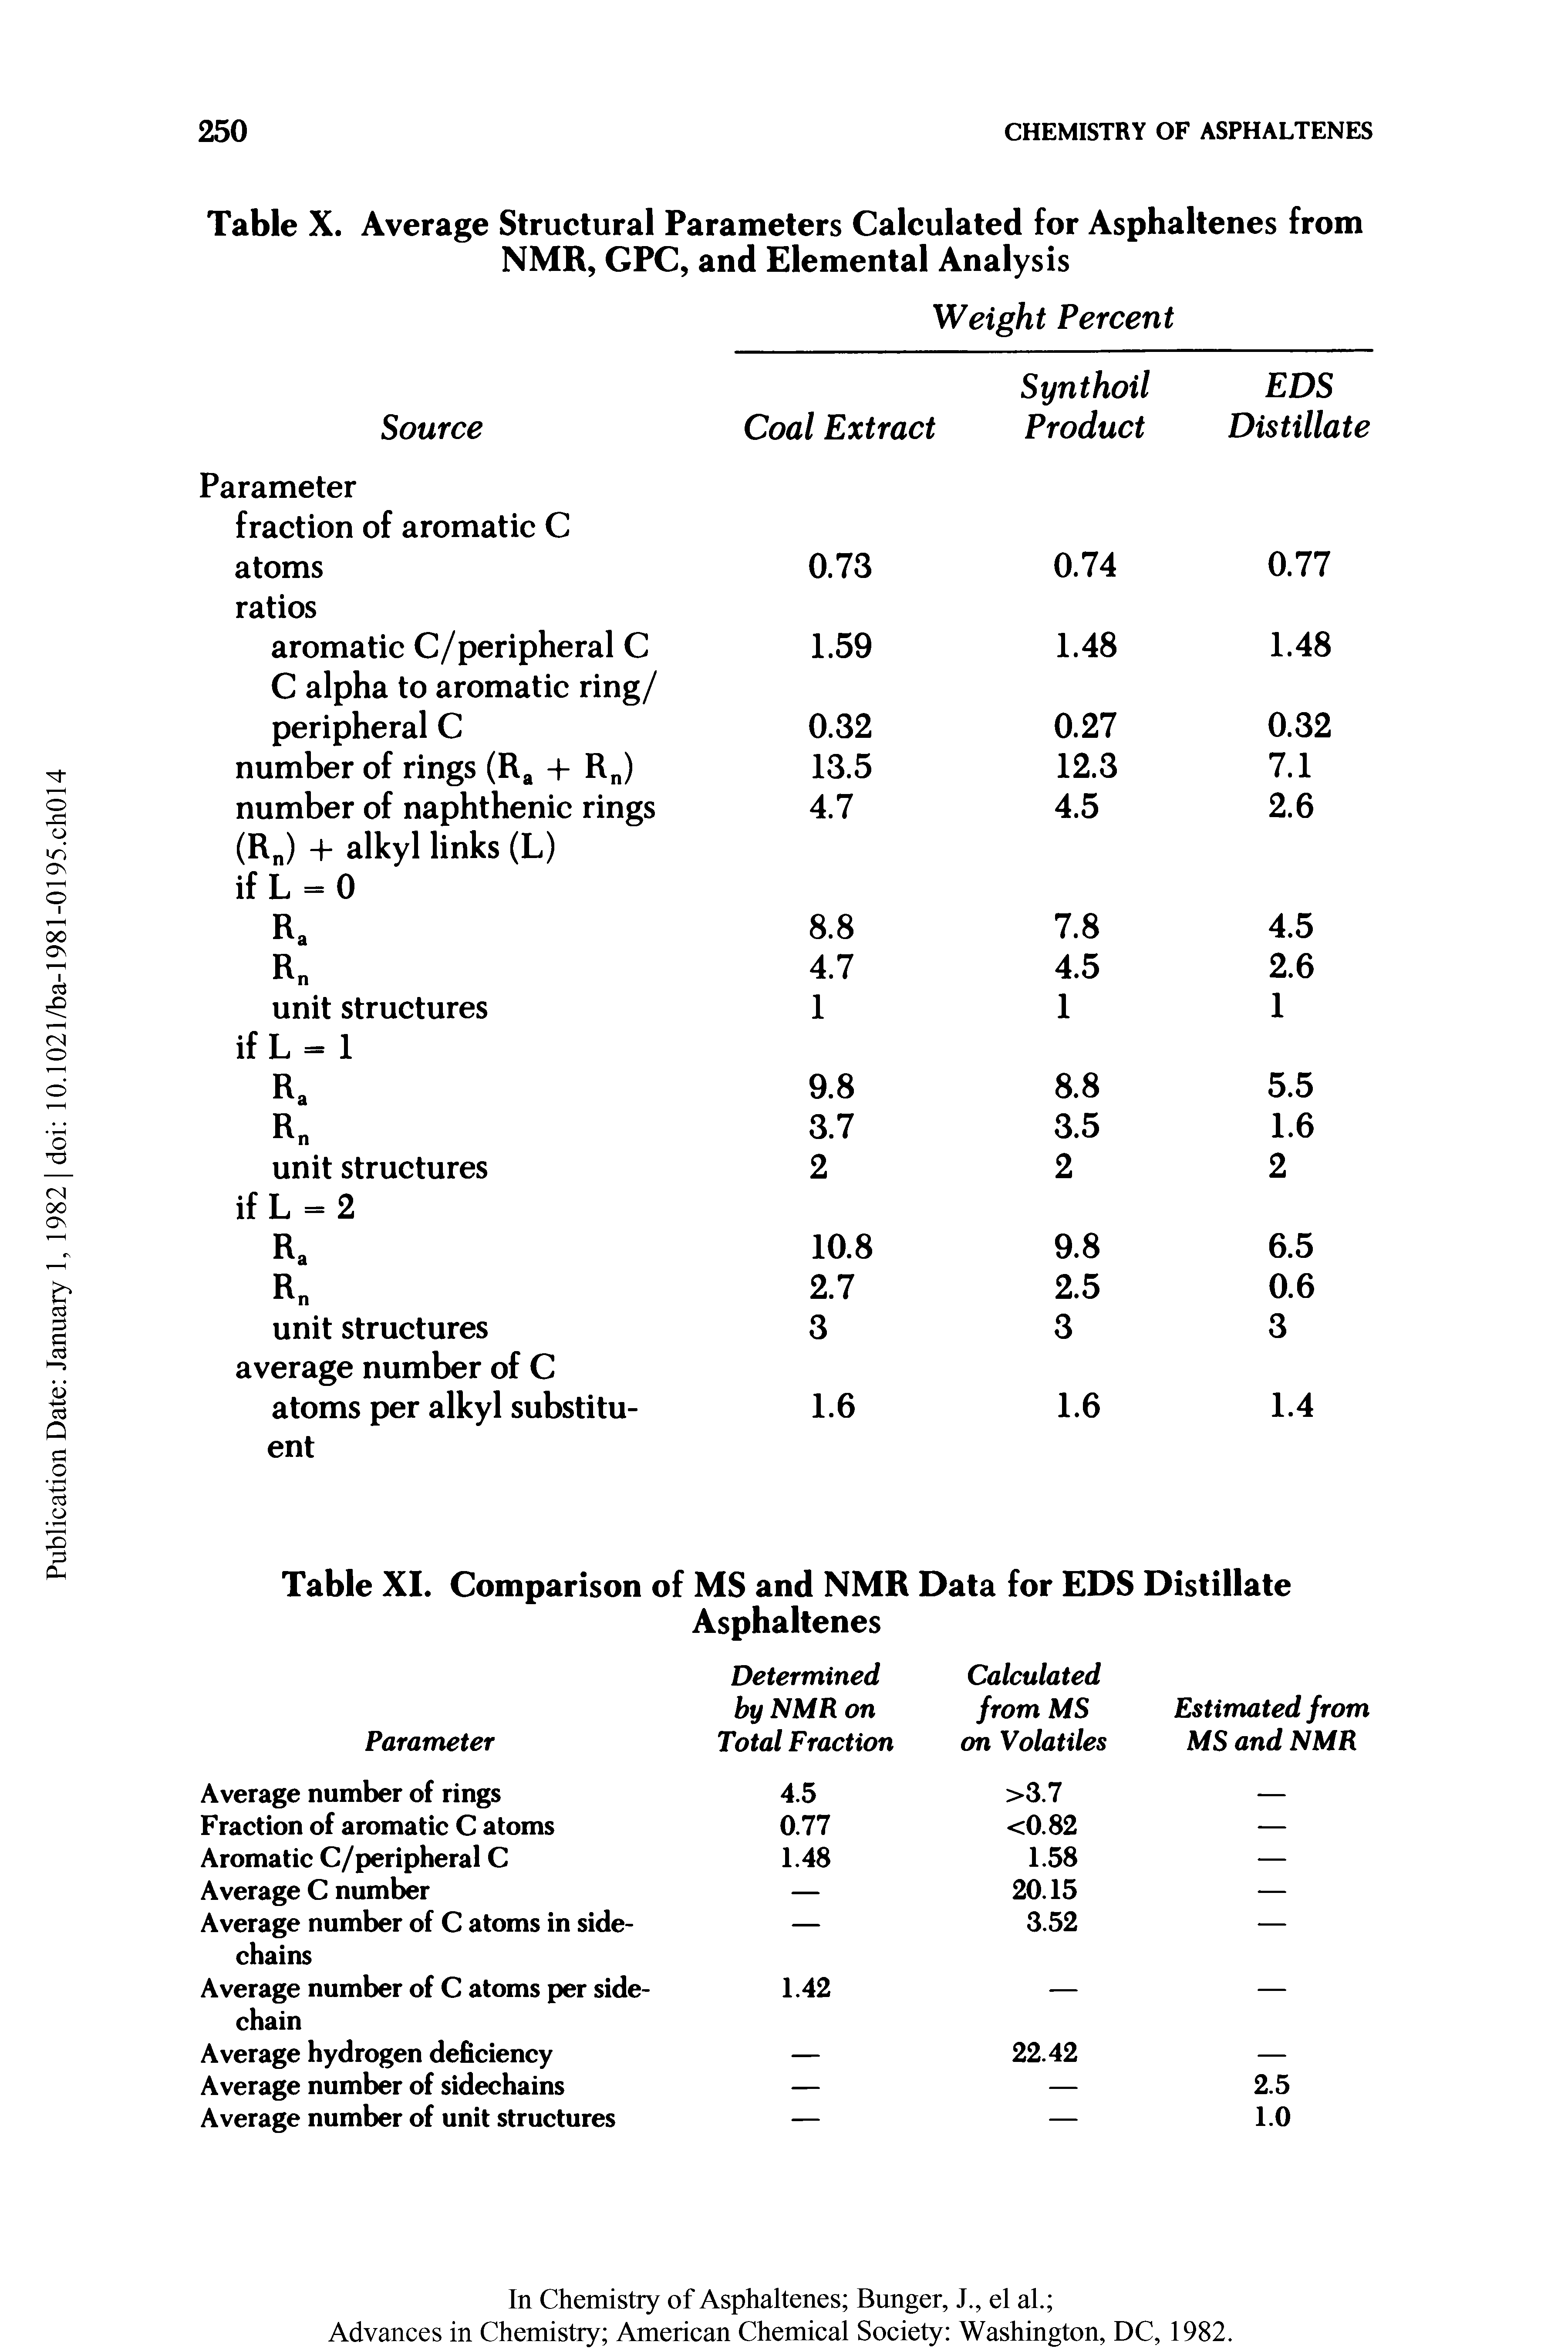 Table X. Average Structural Parameters Calculated for Asphaltenes from NMR, GPC, and Elemental Analysis...